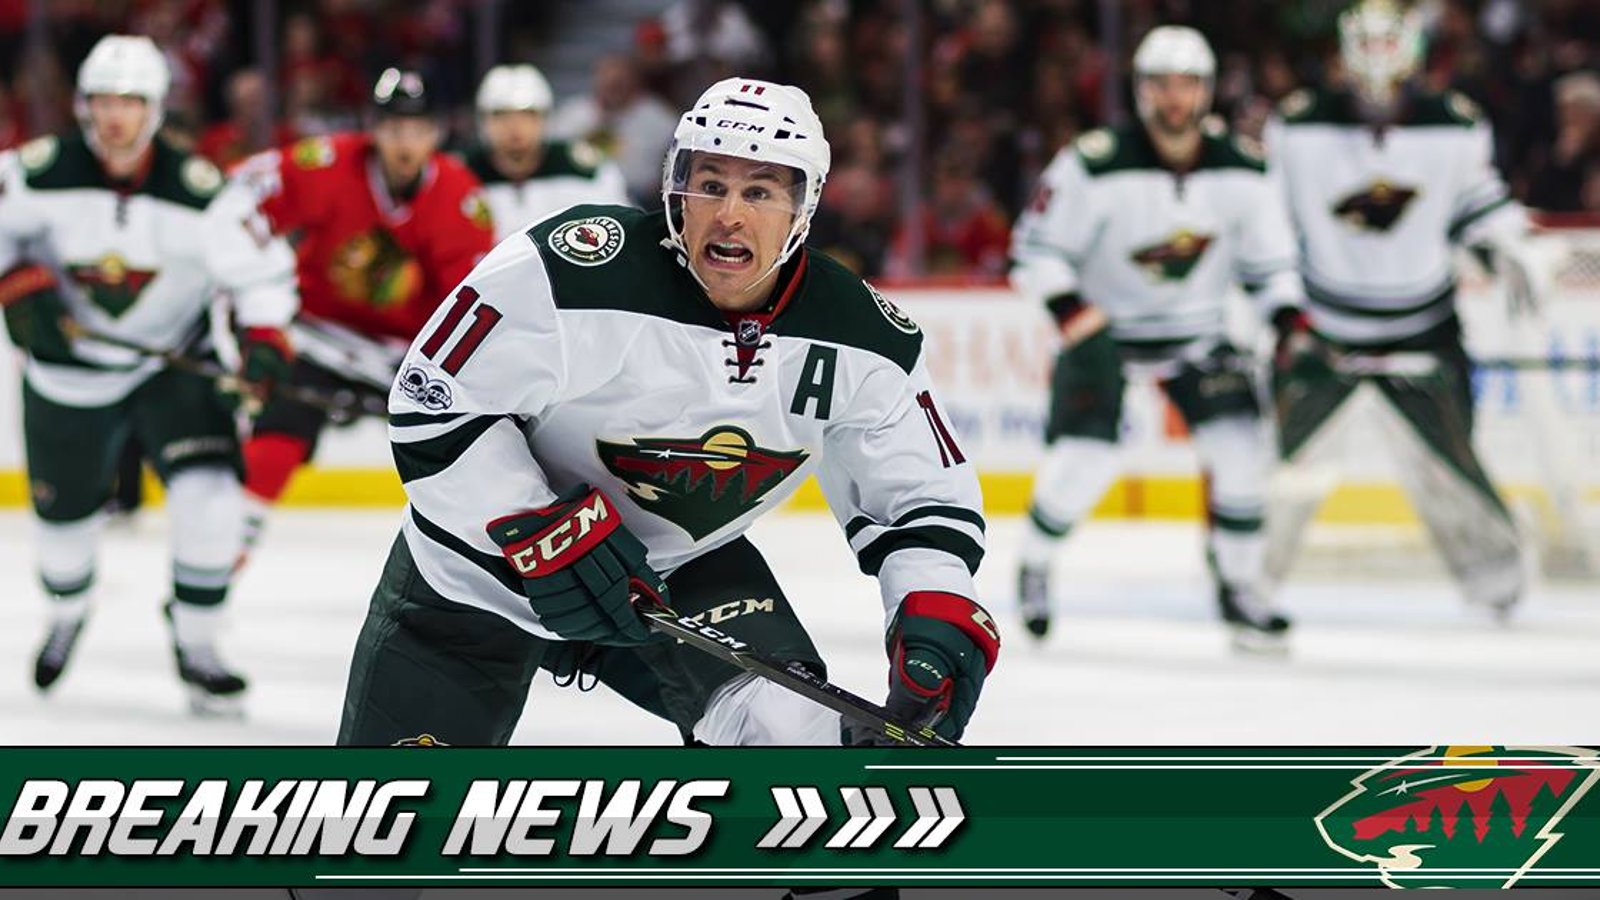 REPORT: Wild forward speaks on the hit that injured him and his return